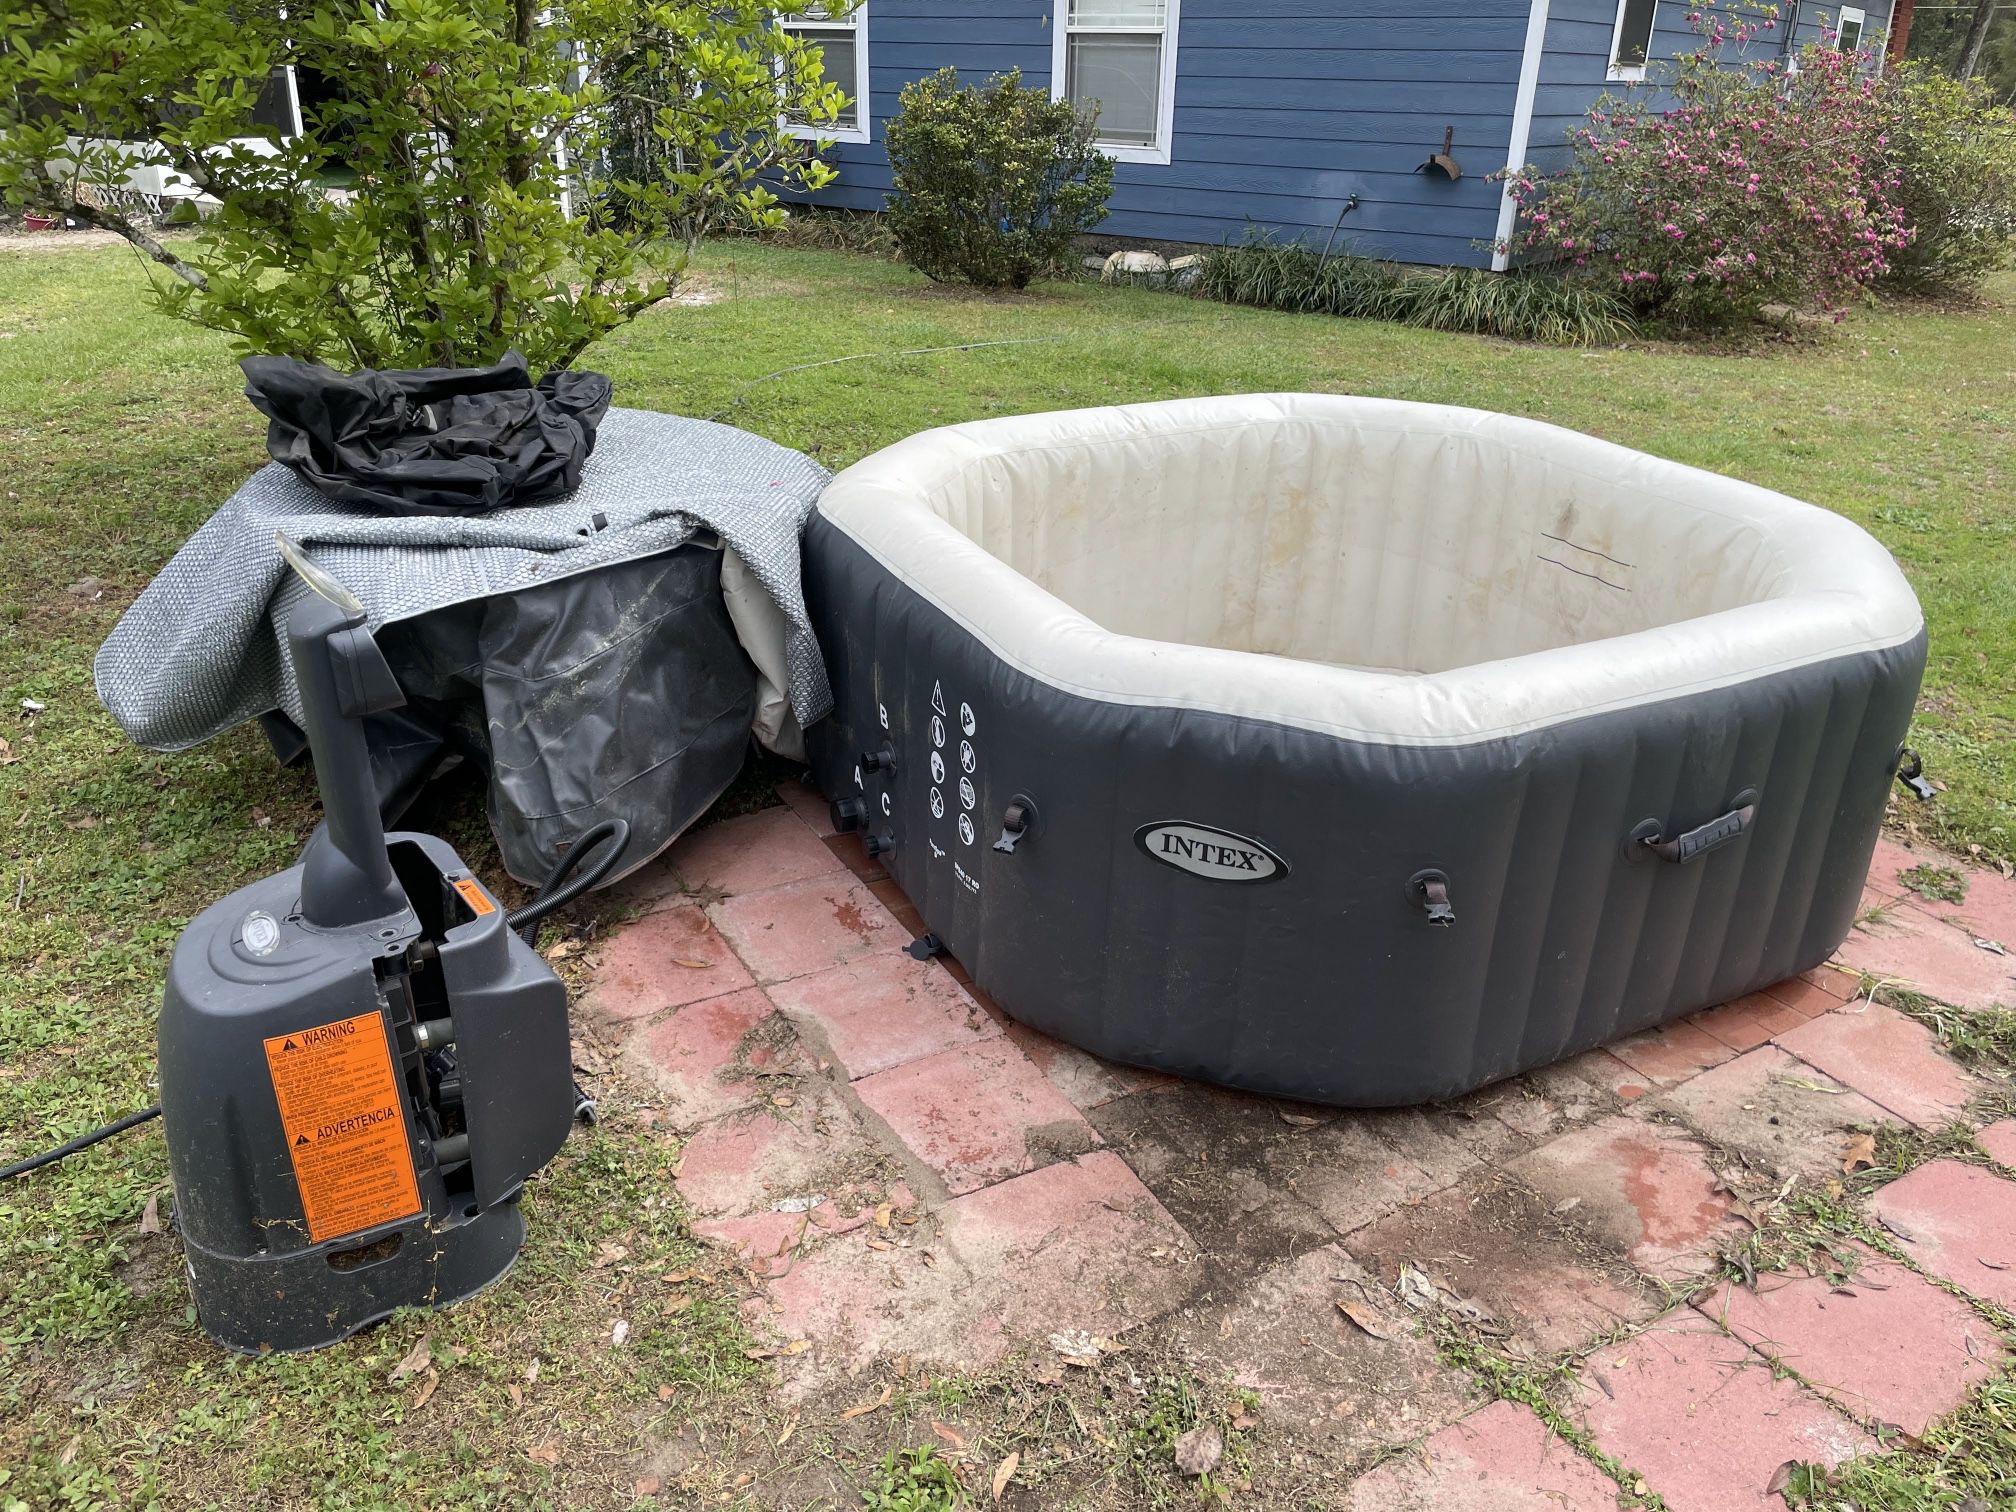 Index Hot Tub With Accessories “ Please Read”